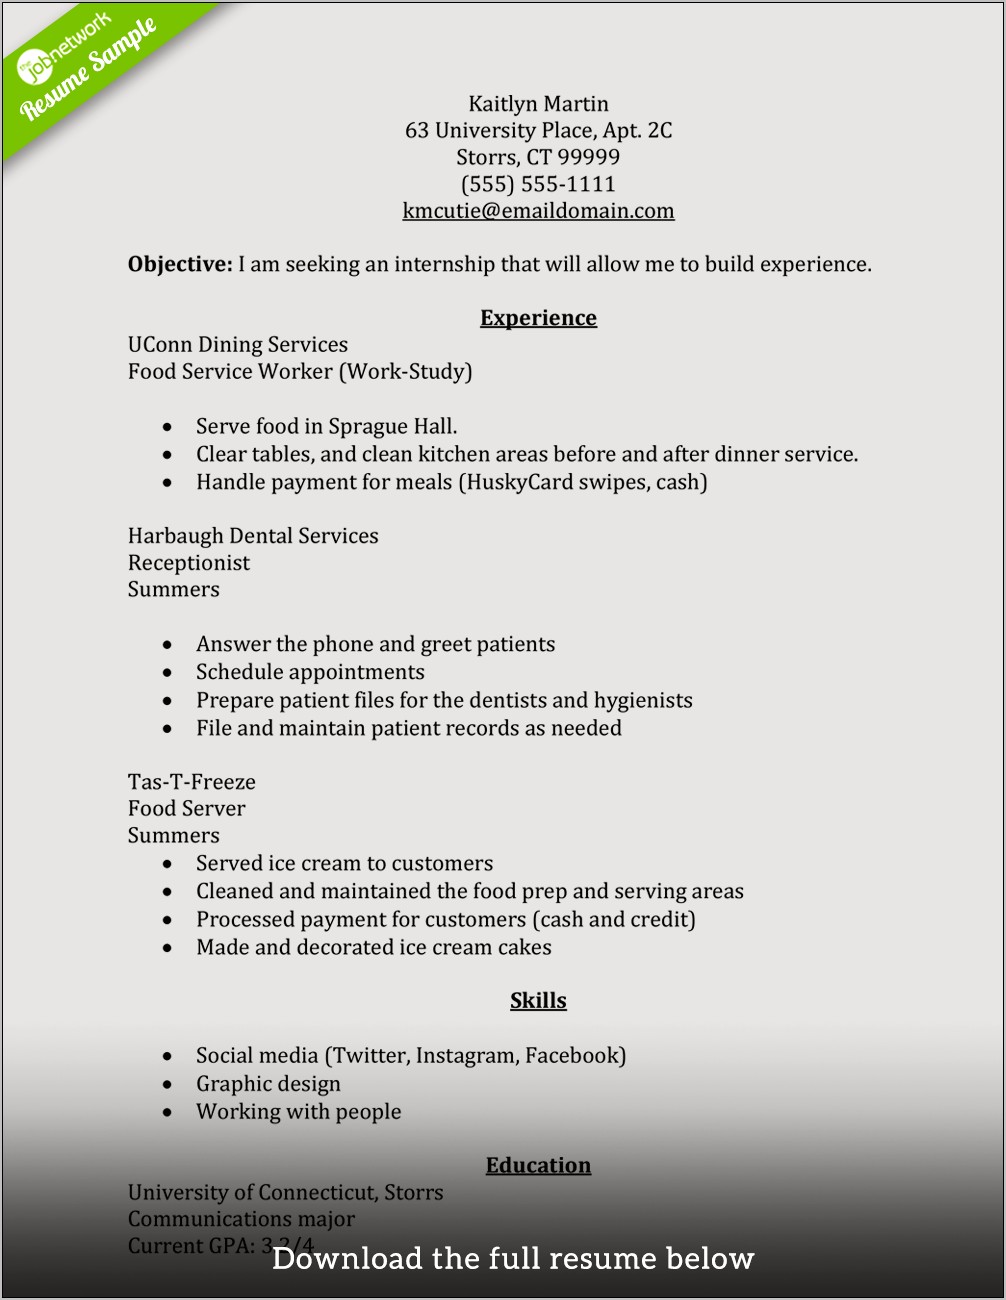 Resume No Work Experience Objective